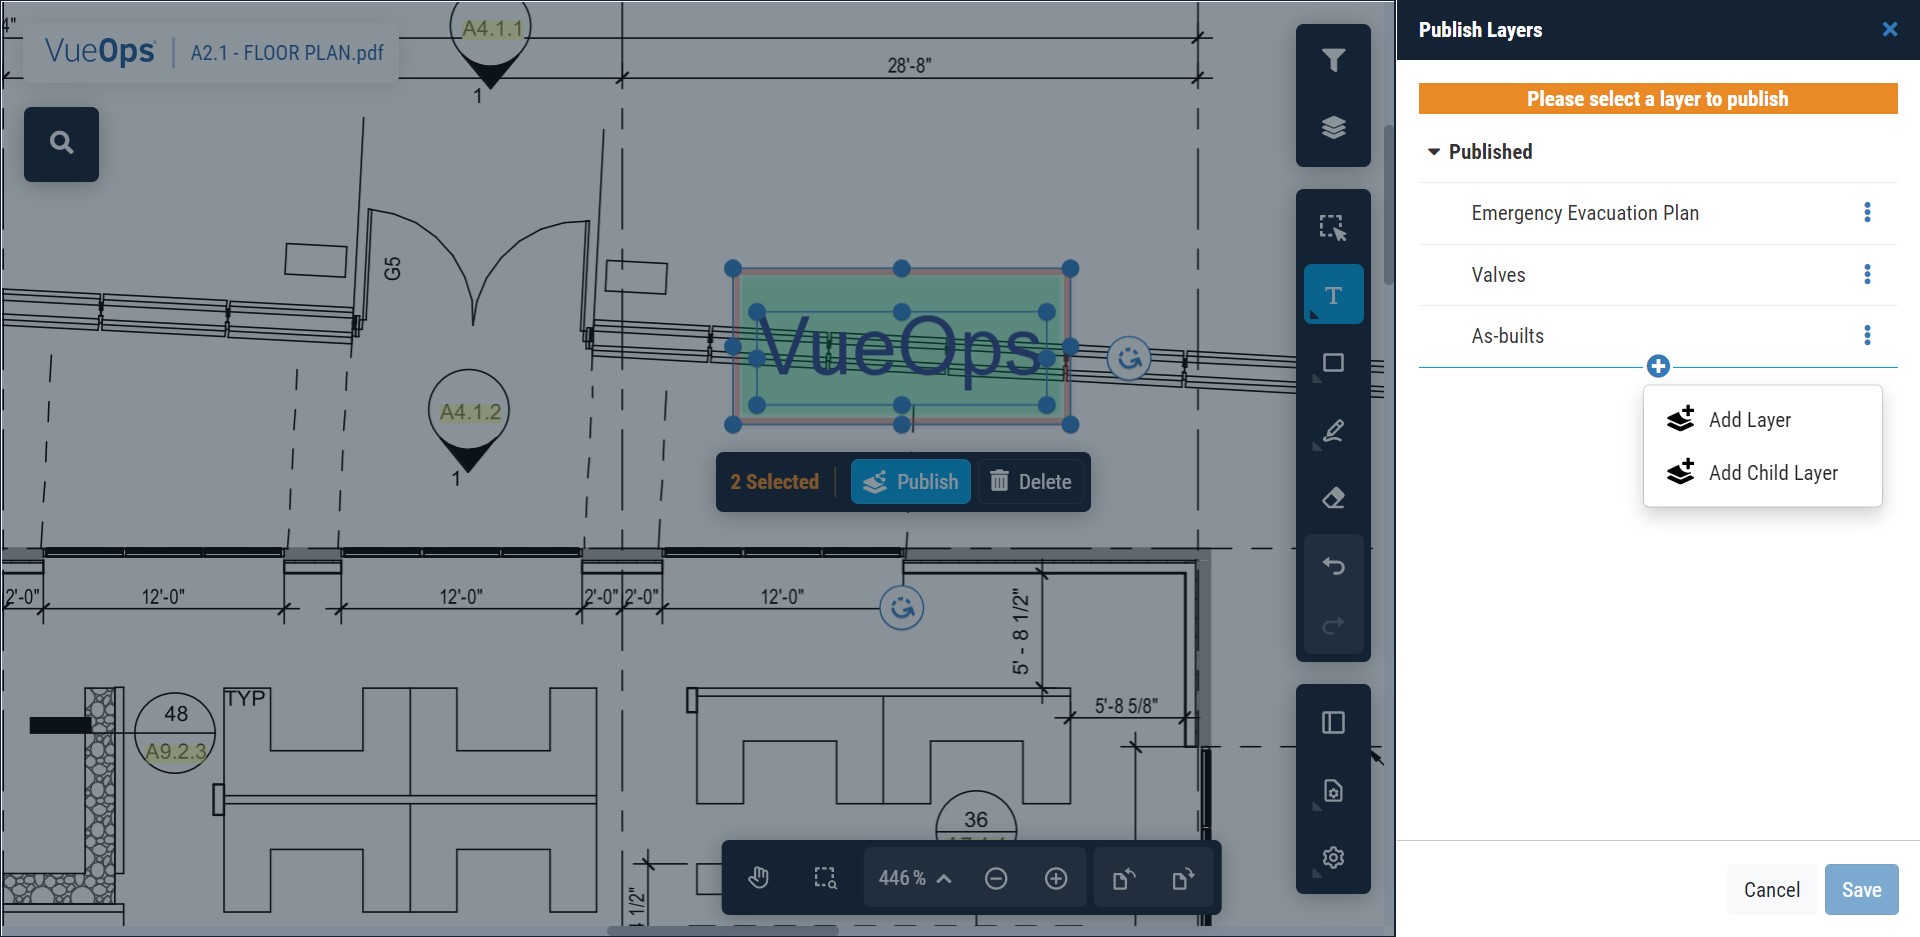 New in VueOps: Save And Share PDF Markups with Your Team